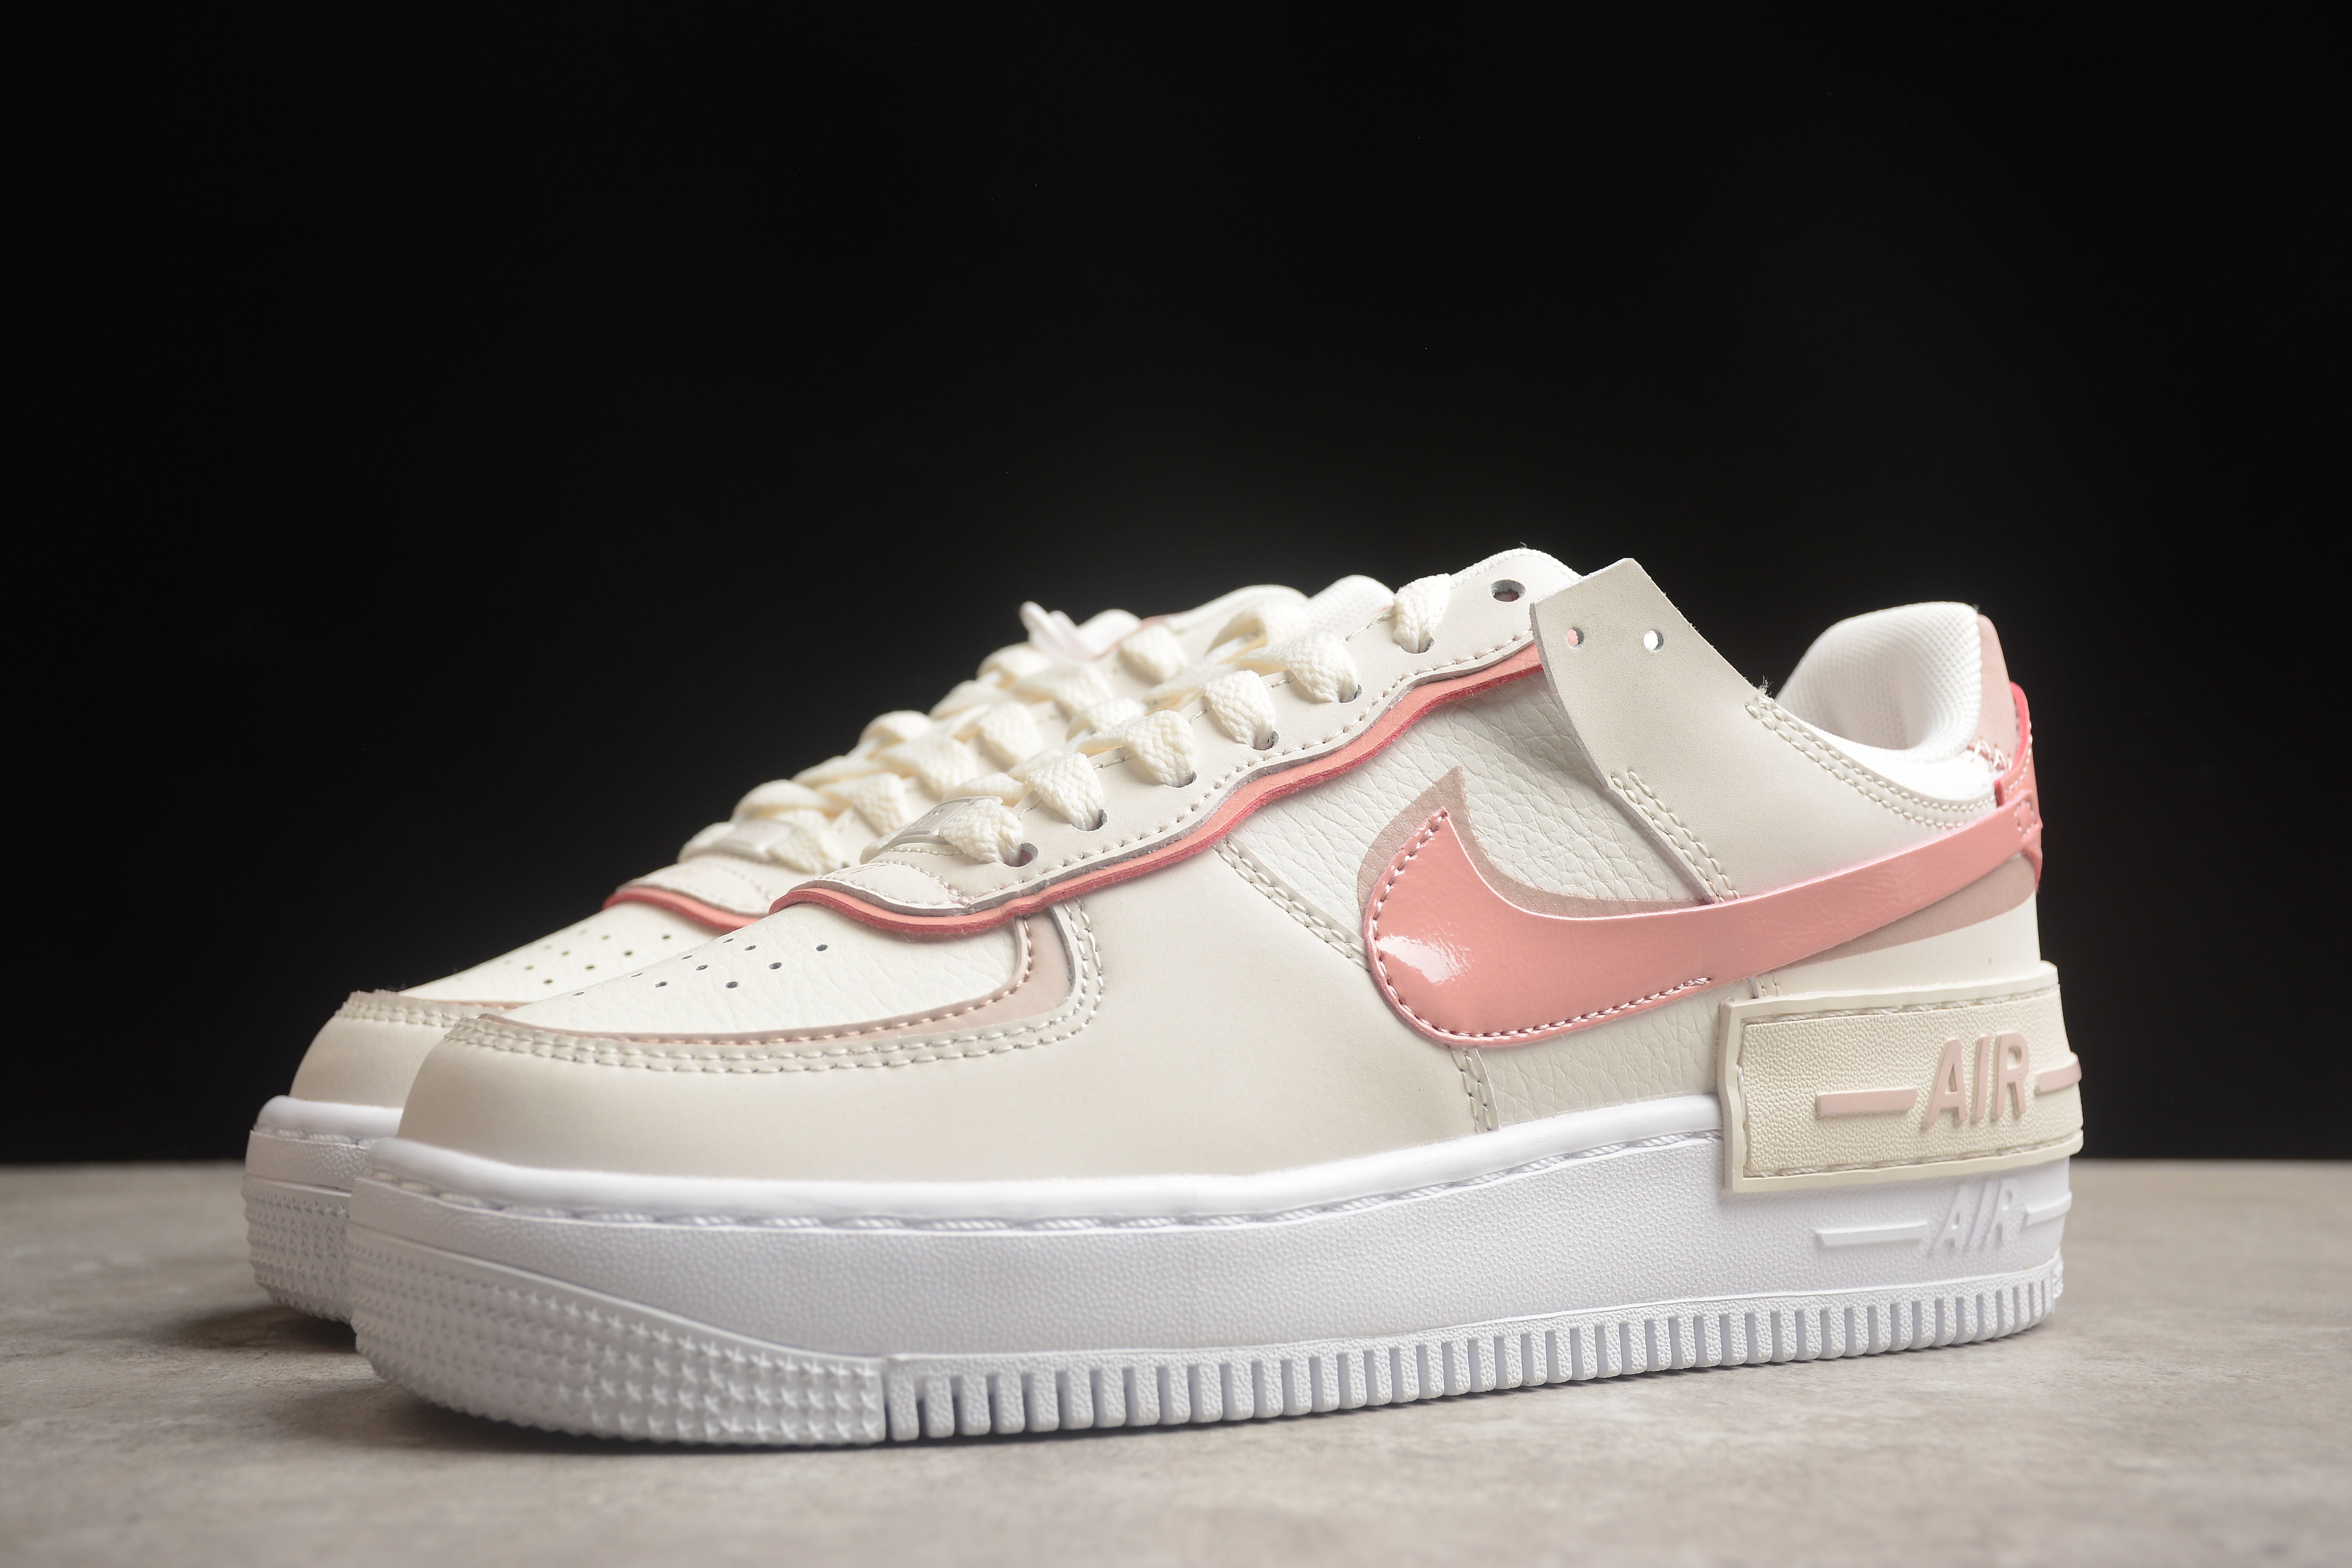 Nike airforce A1 nude shoes